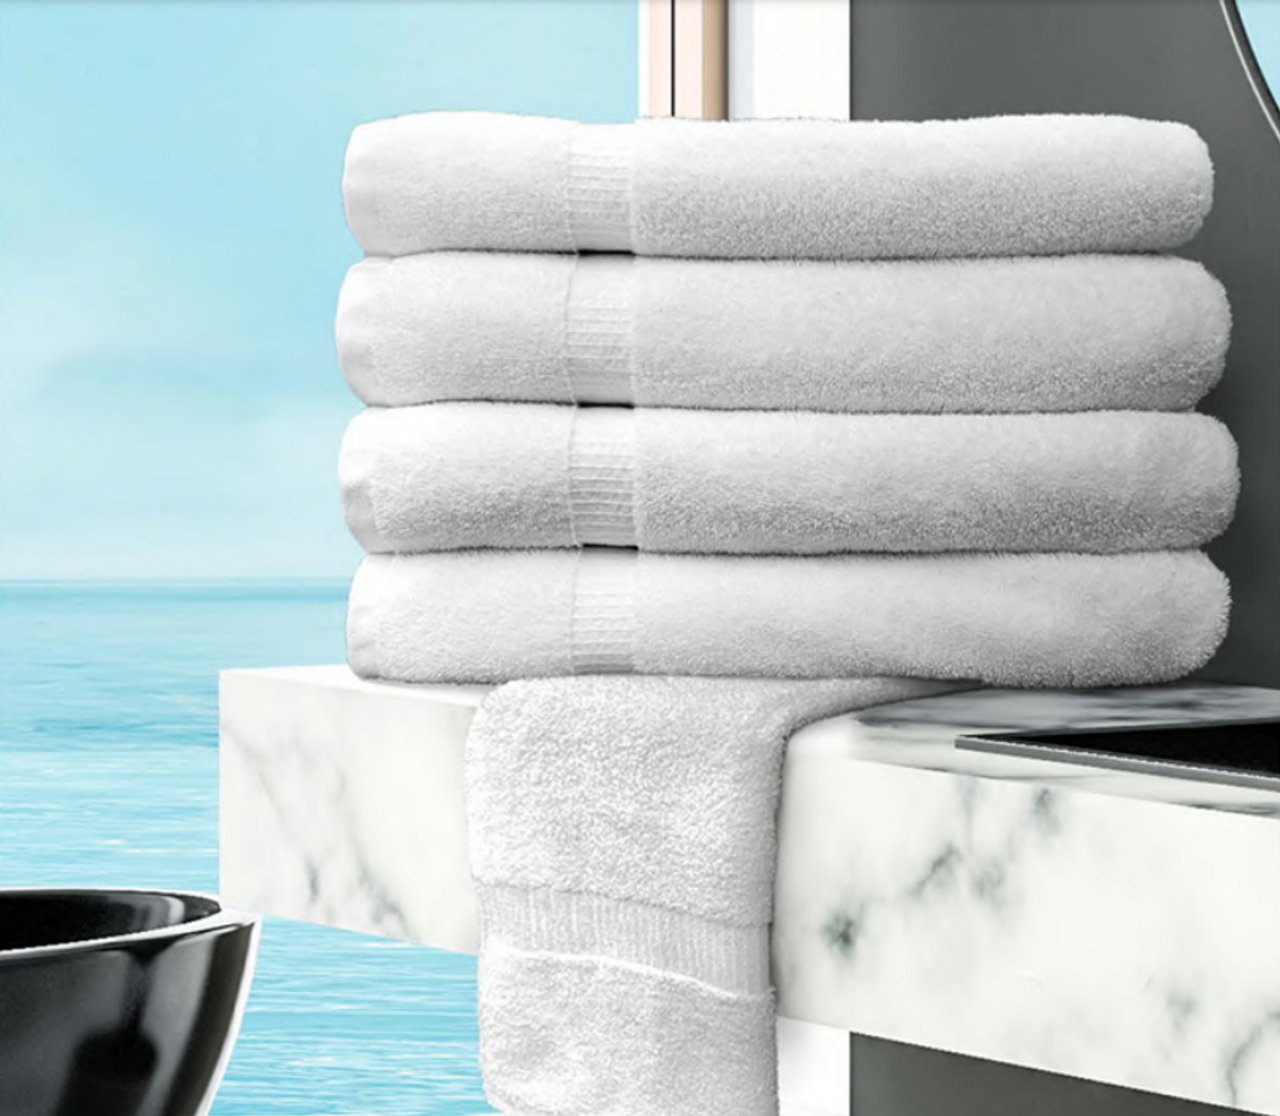 https://cdn11.bigcommerce.com/s-iys0o/images/stencil/1280x1280/products/986/4311/Belleza_Towels_Group__82881.1622731038.png?c=2